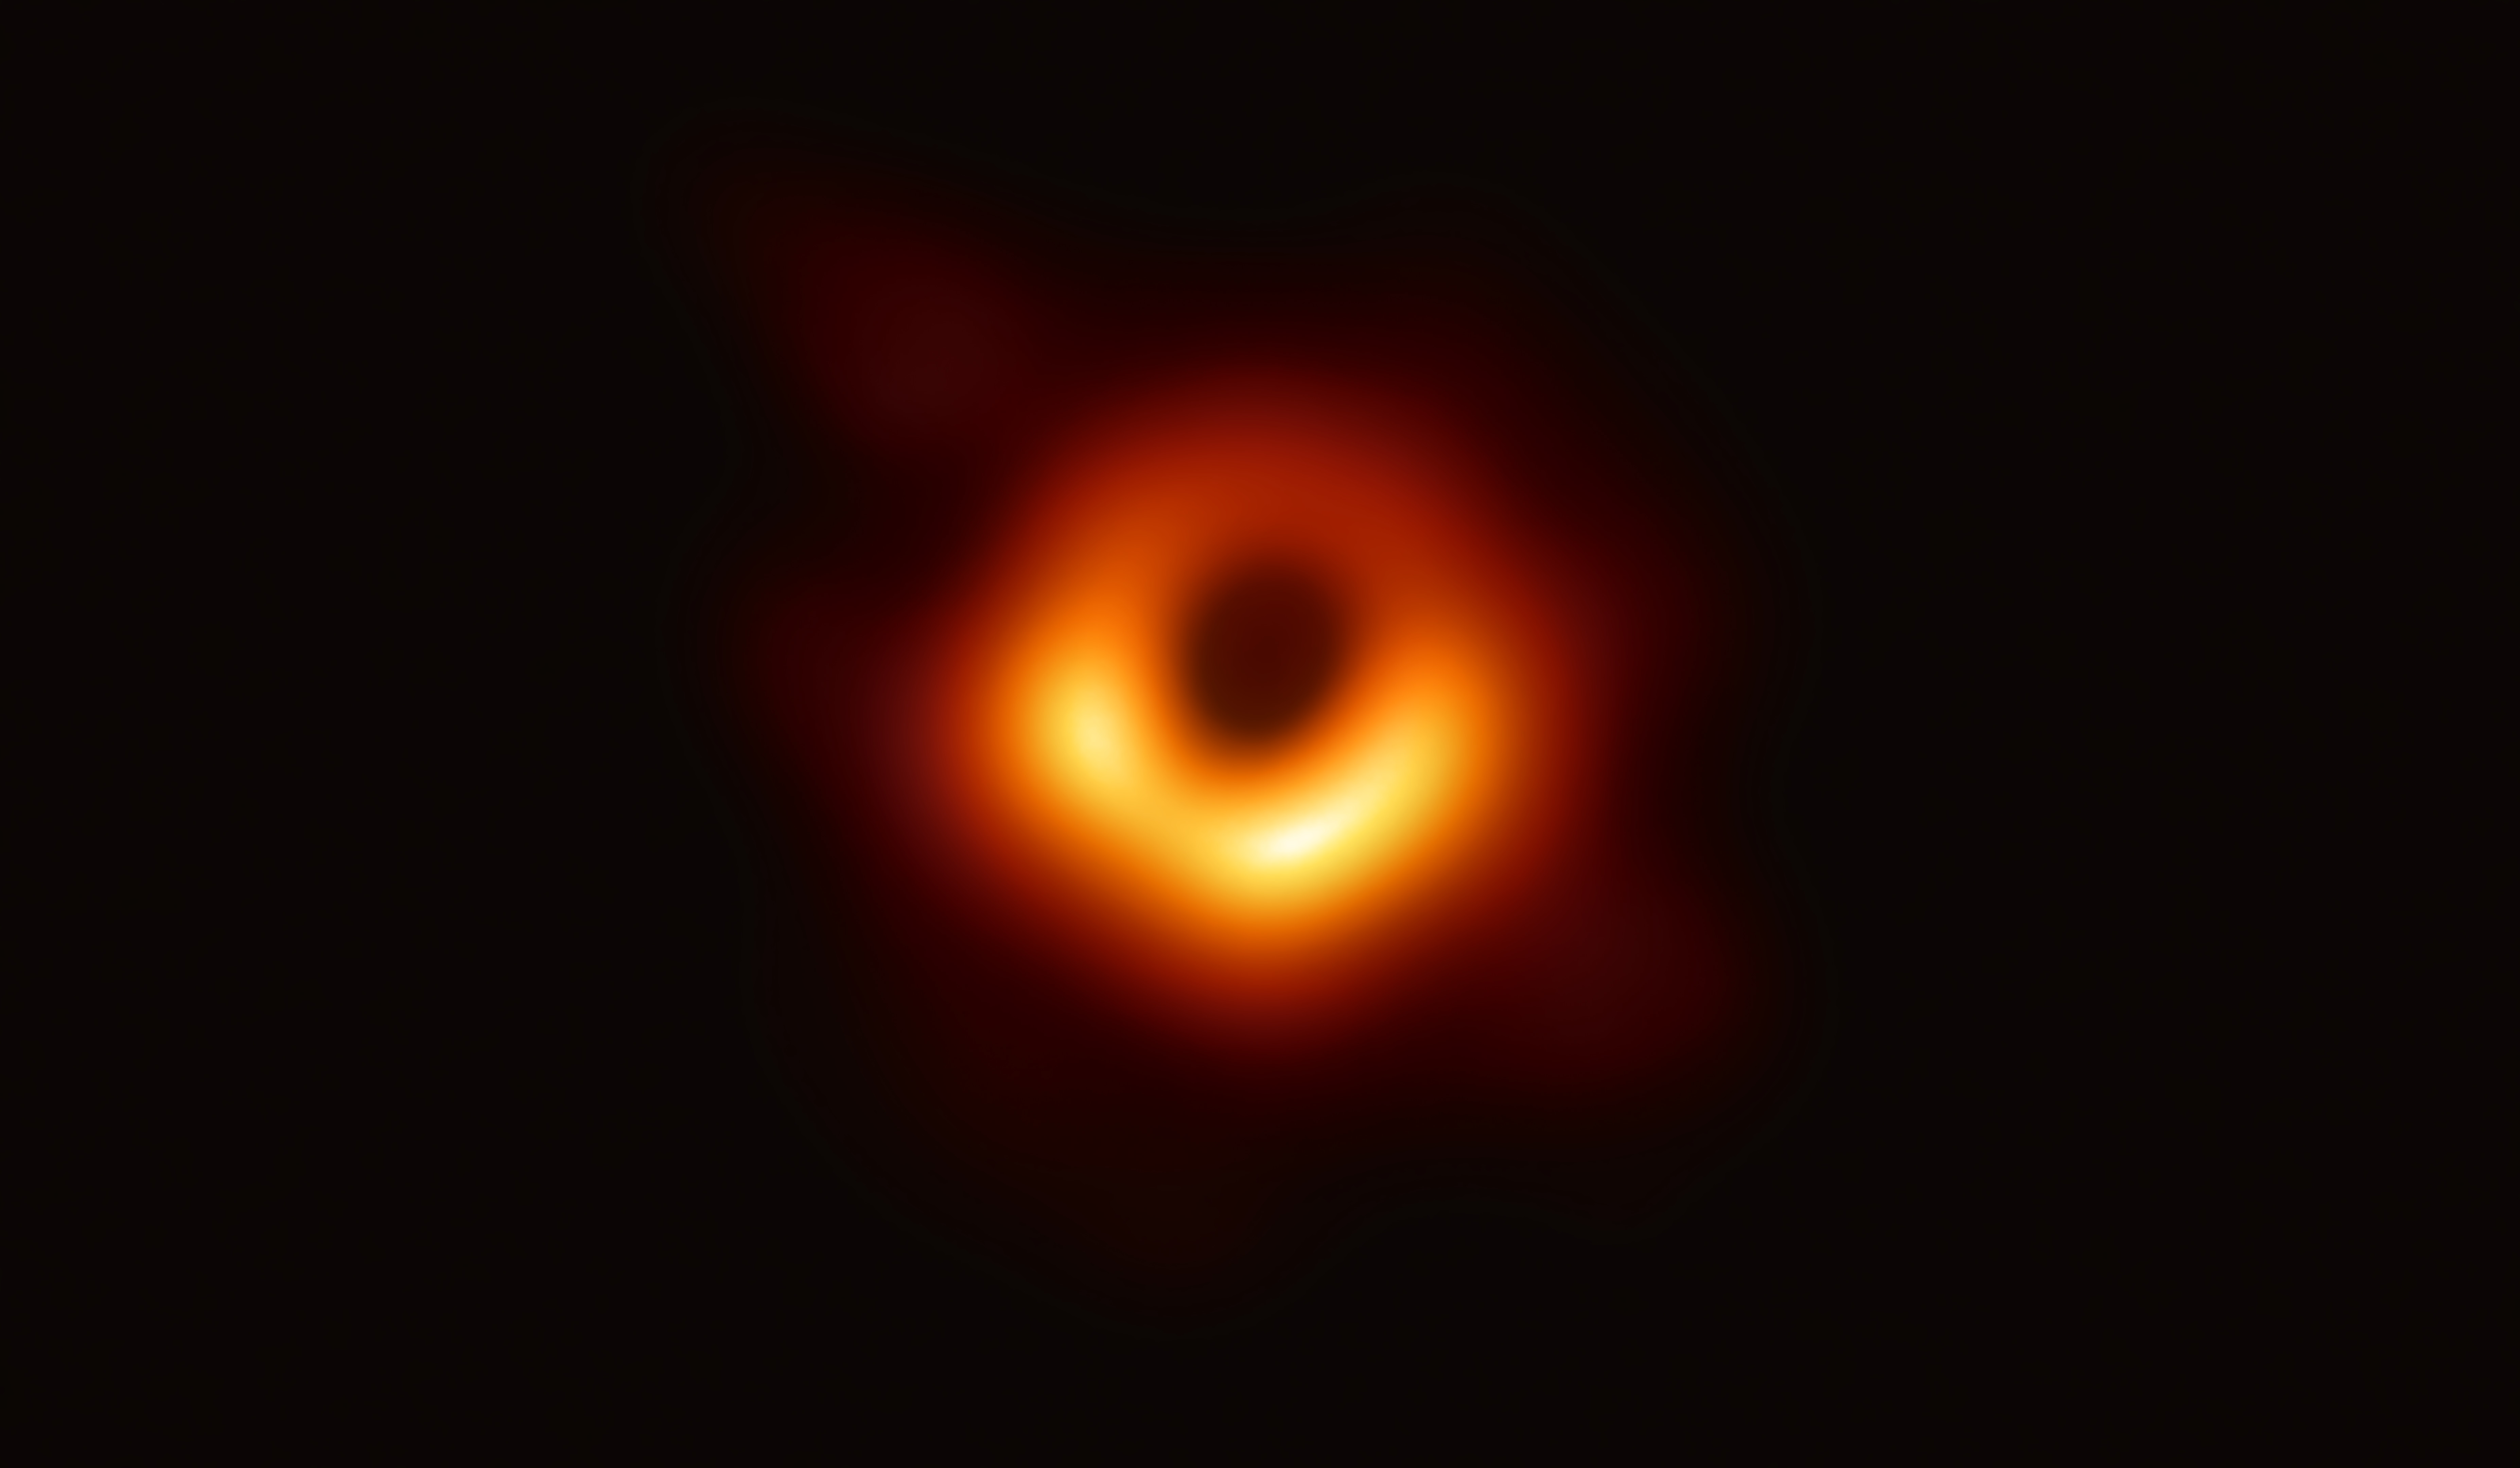 Using the Event Horizon Telescope, scientists obtained an image of the black hole at the center of the galaxy M87. The black hole is outlined by emission from hot gas swirling around it under the influence of strong gravity near its event horizon. This is the first picture of a black hole.